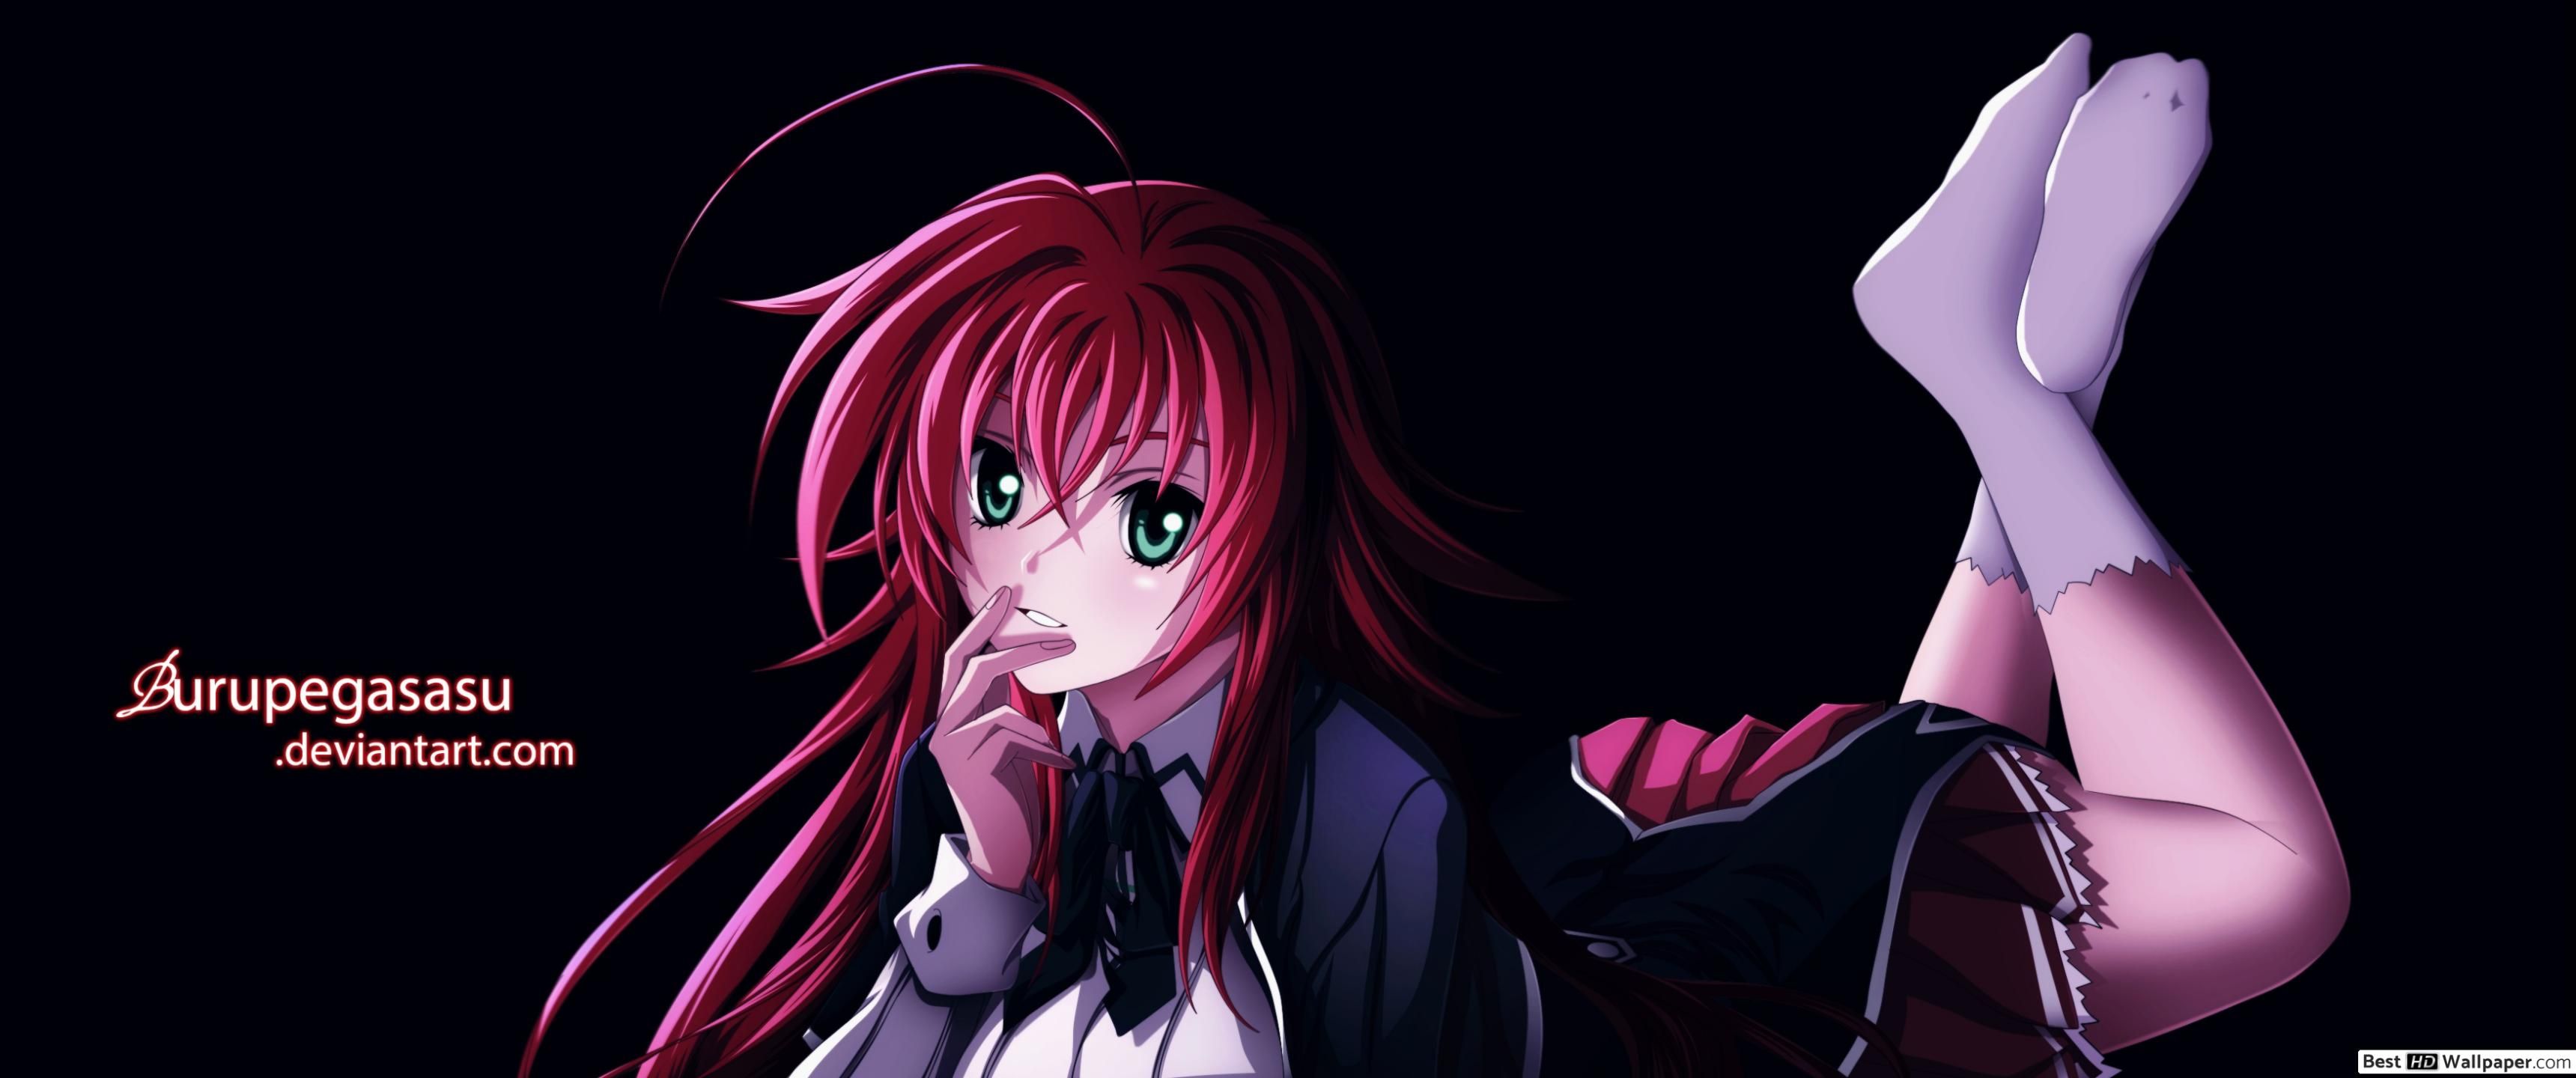 High School DXD Gremory HD wallpaper download